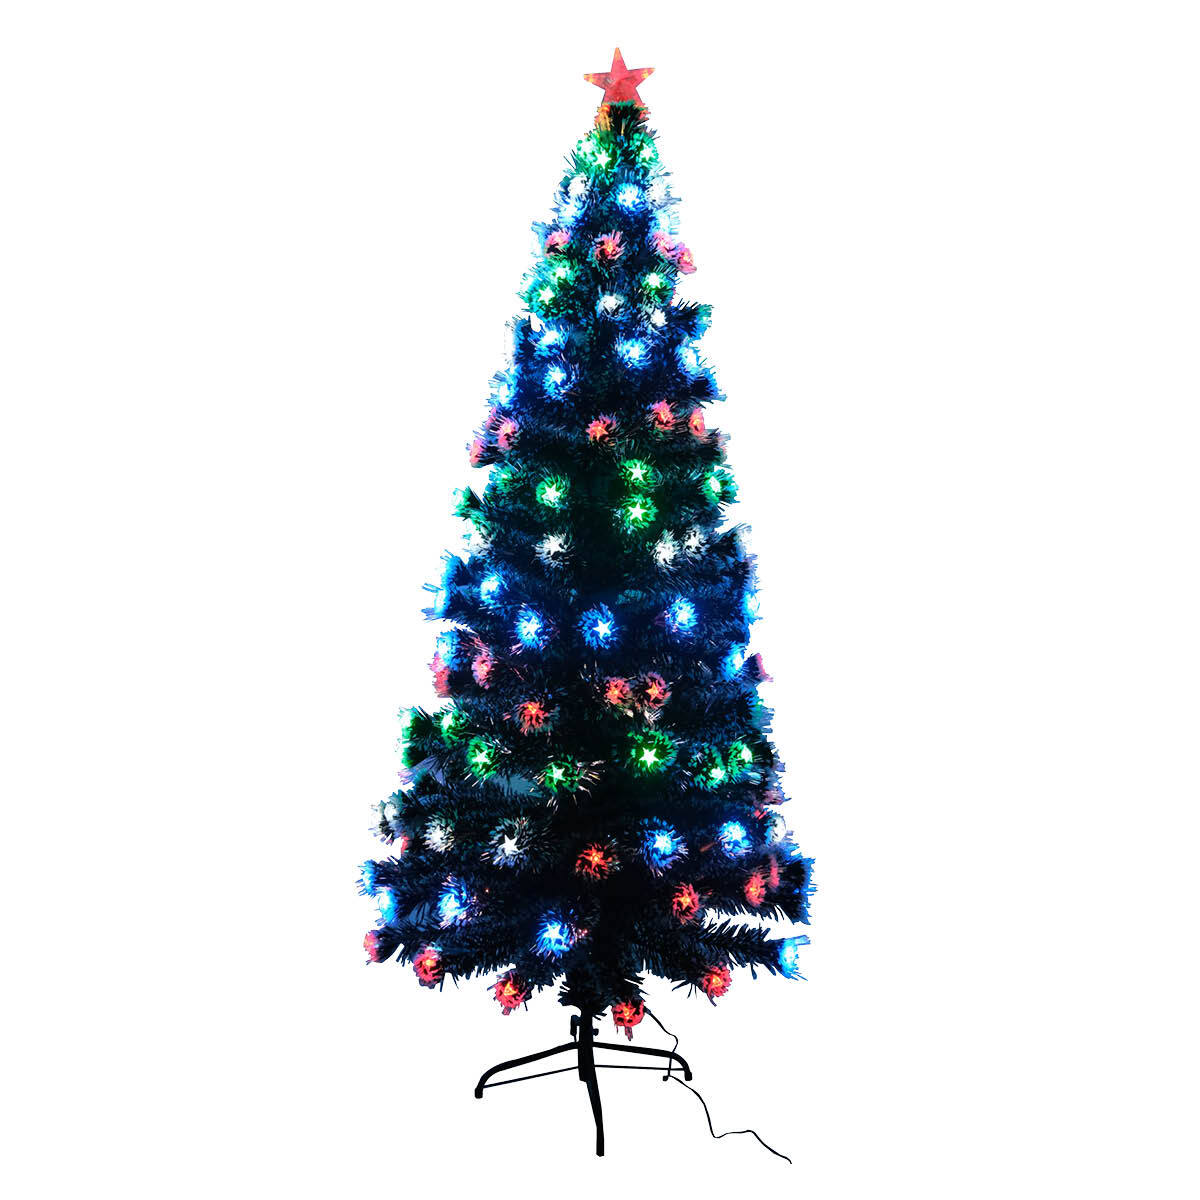 Christmas By Sas 1.8m Pine Tree 210 Multi-Colour LED Lights With 8 Functions - SILBERSHELL